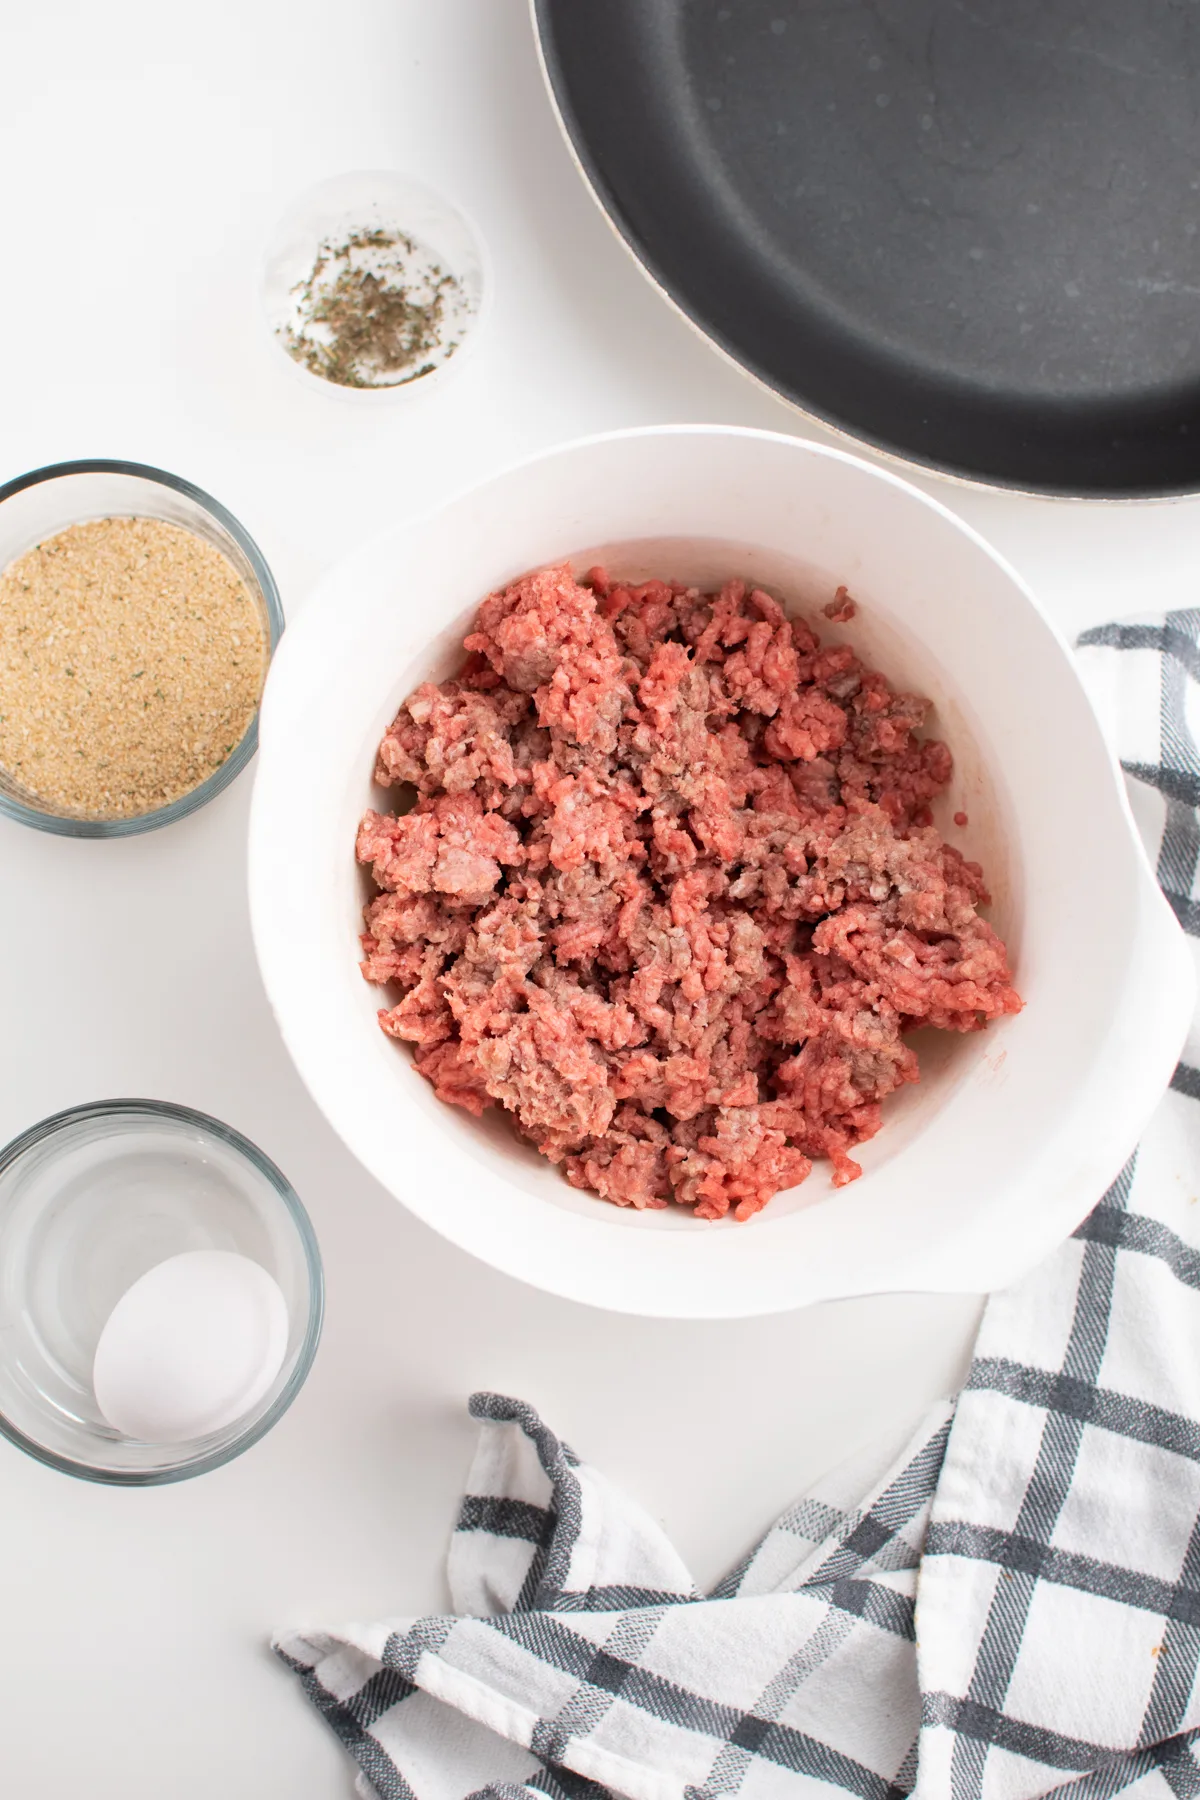 Ground beef in white mixing bowl next to egg, bread crumbs and seasonings.